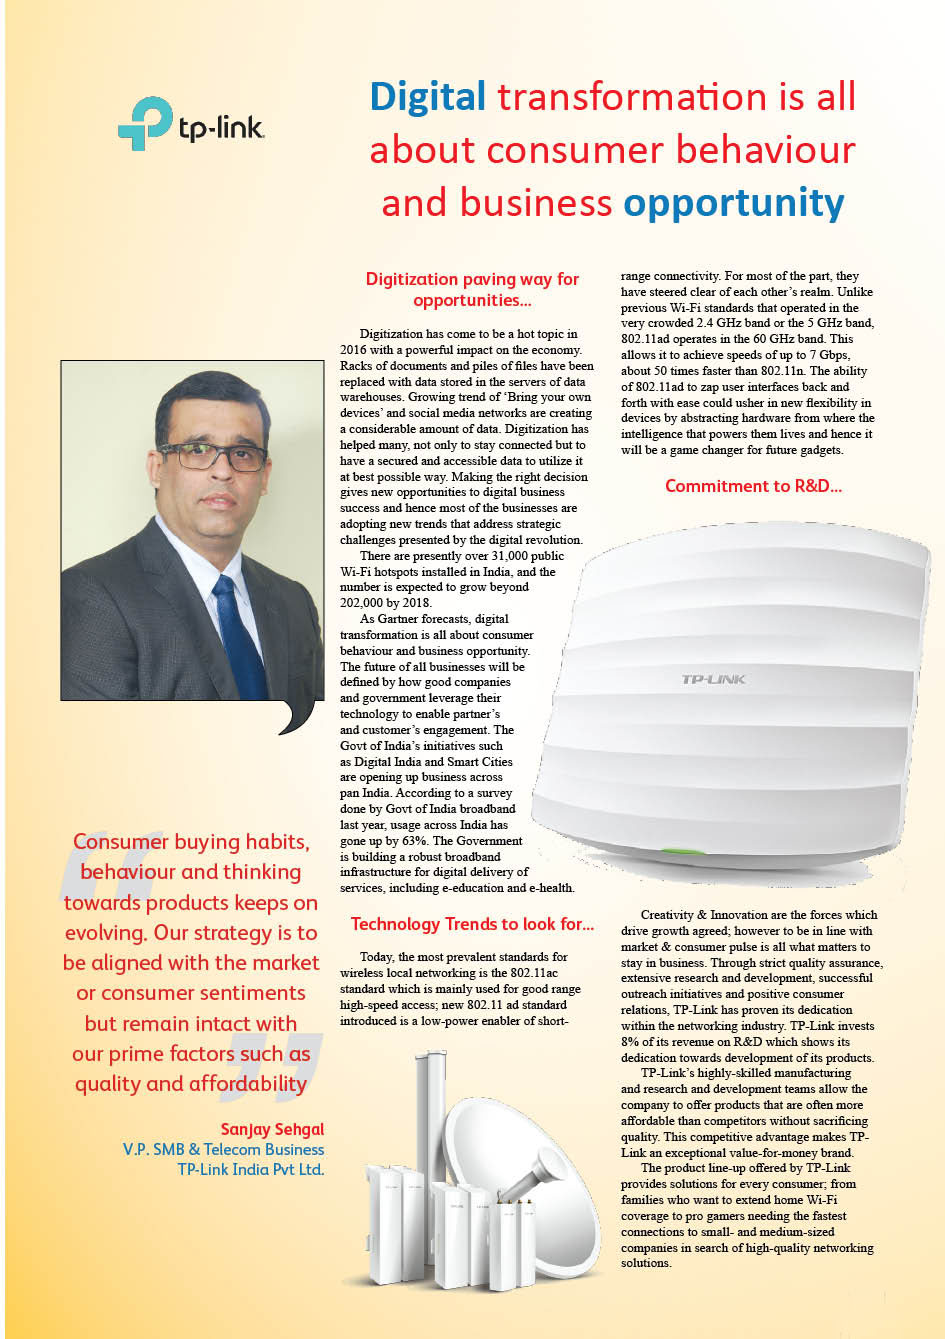 TP-Link India Pvt Ltd.  : Digital transformation is all about consumer behaviour and business opportunity